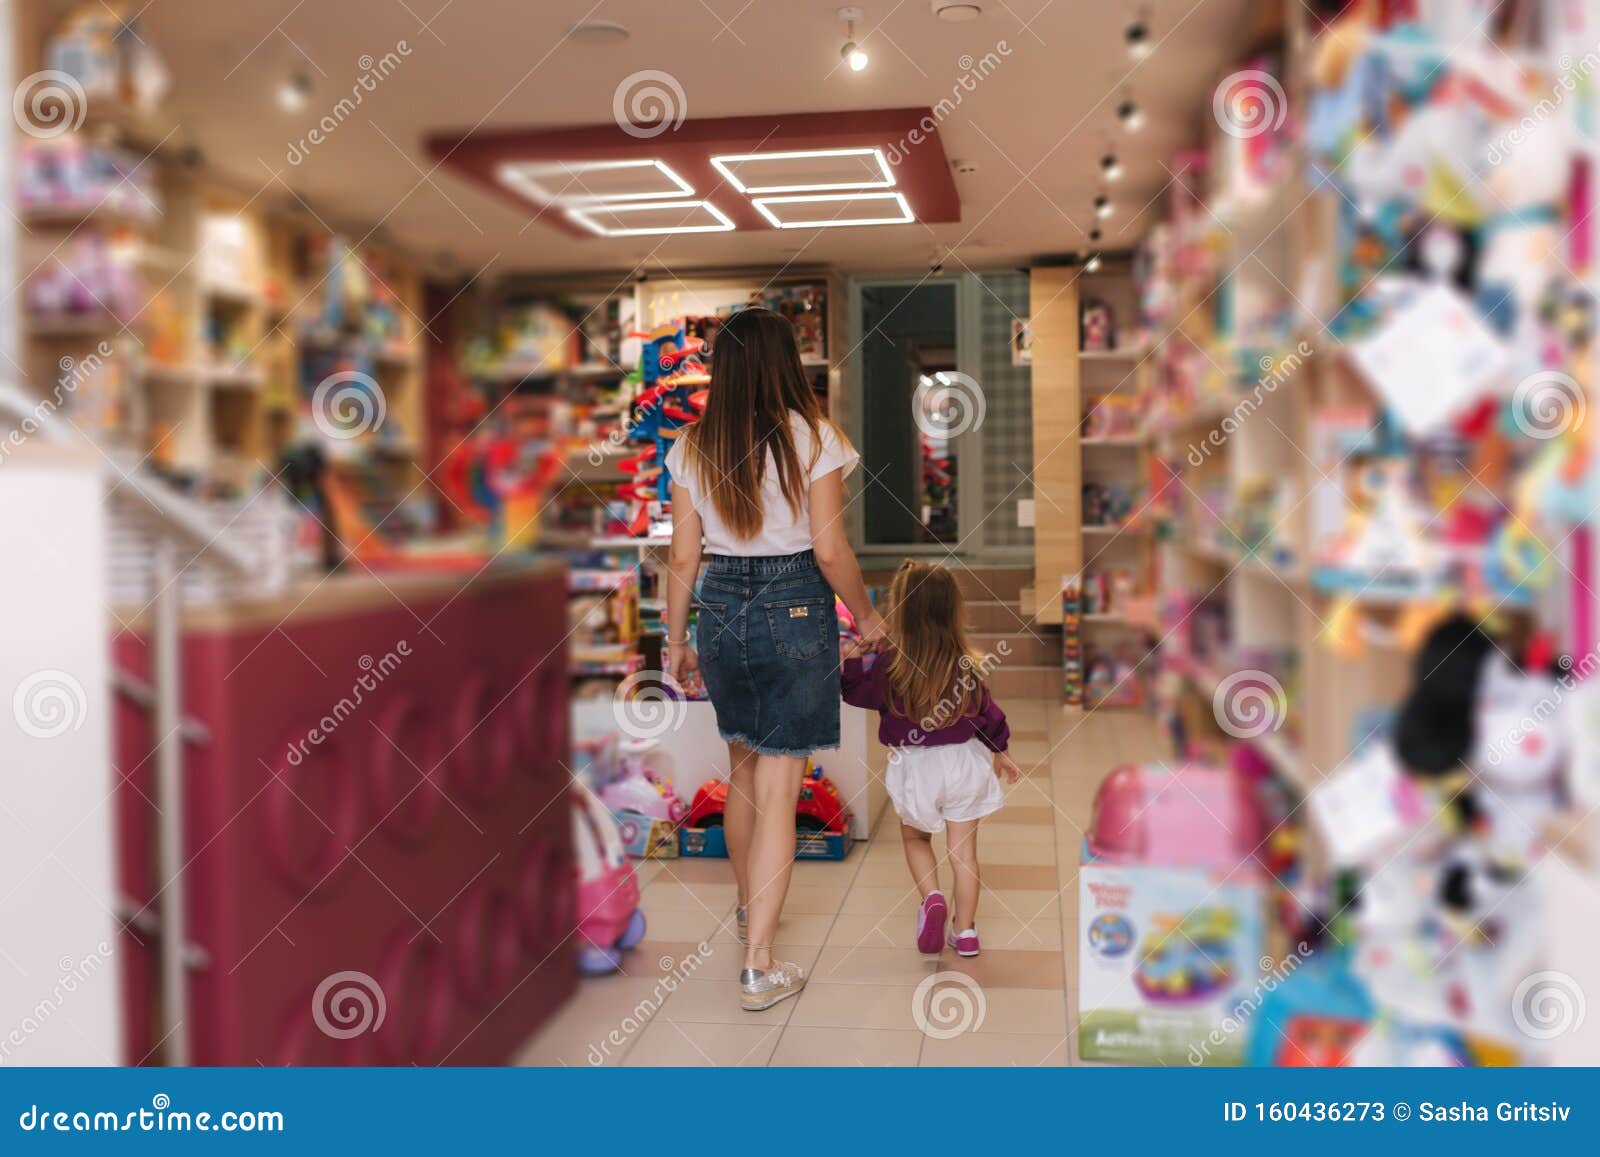 go to the toy store